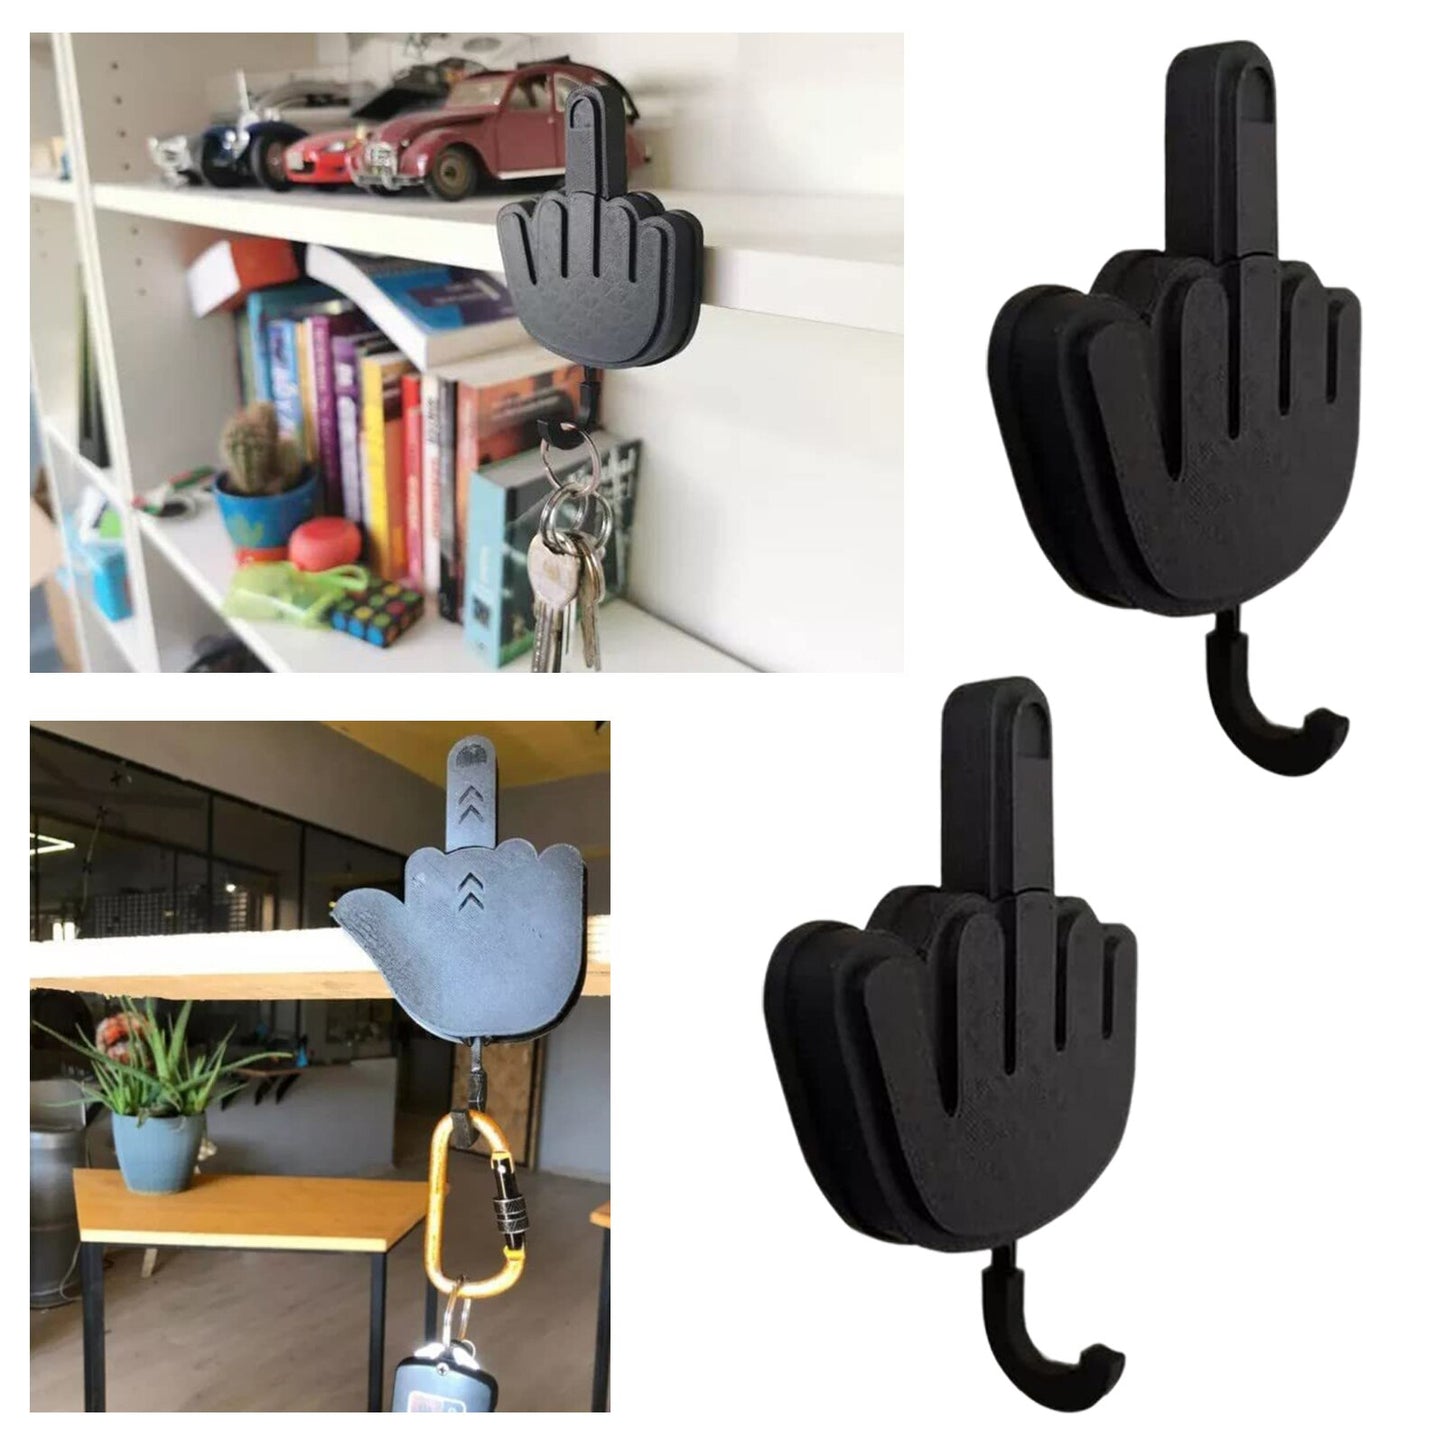 CheekyHooks - Middle Finger Self-Adhesive Key Holder and Wall Hanger